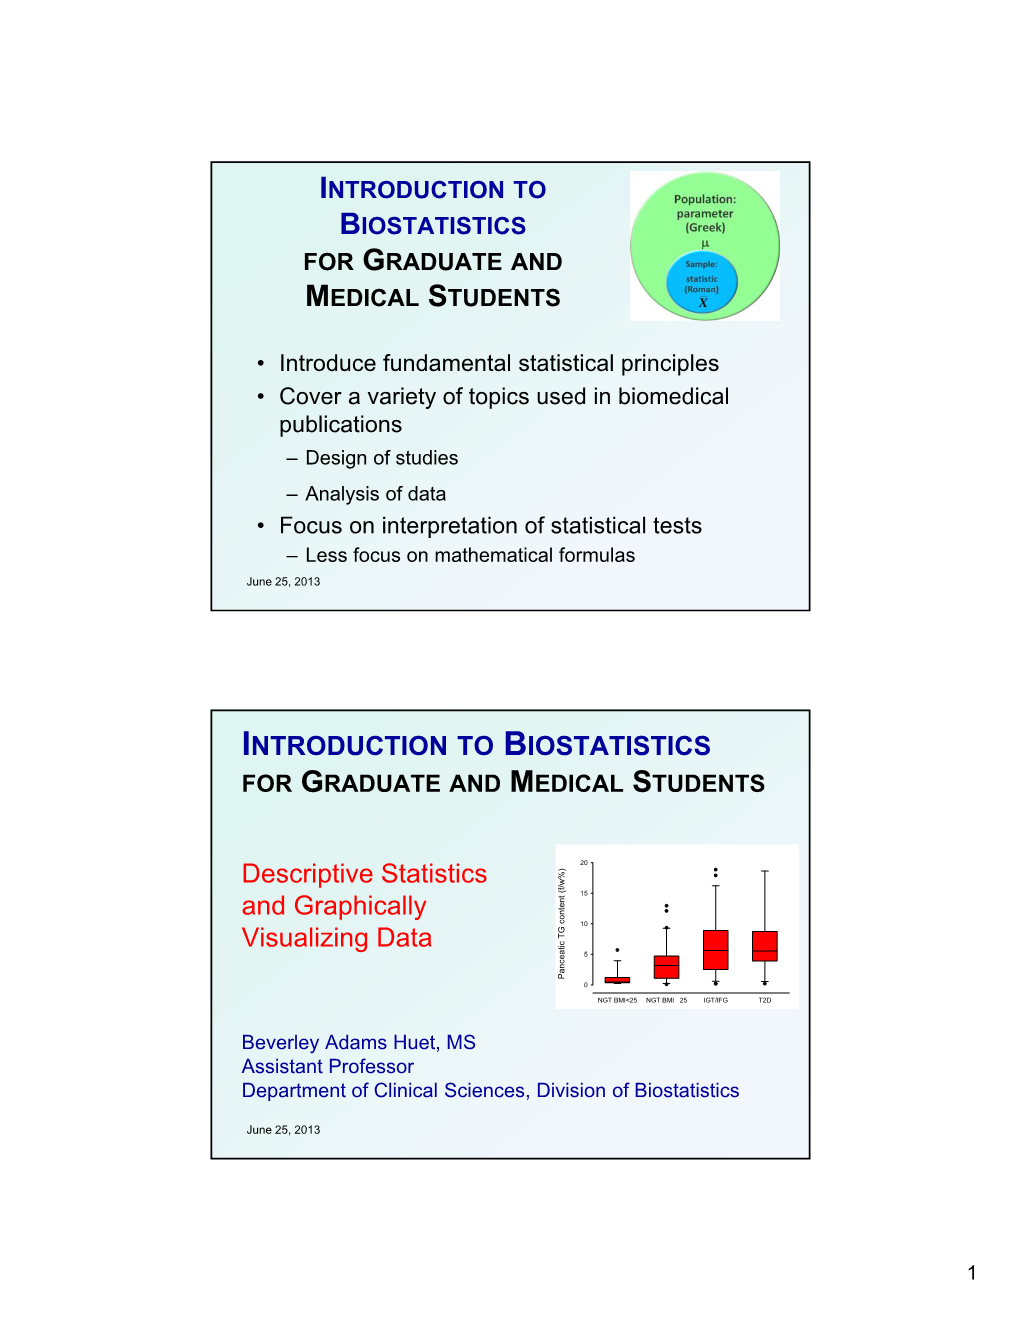 Introduction to Biostatistics for Graduate and Medical Students